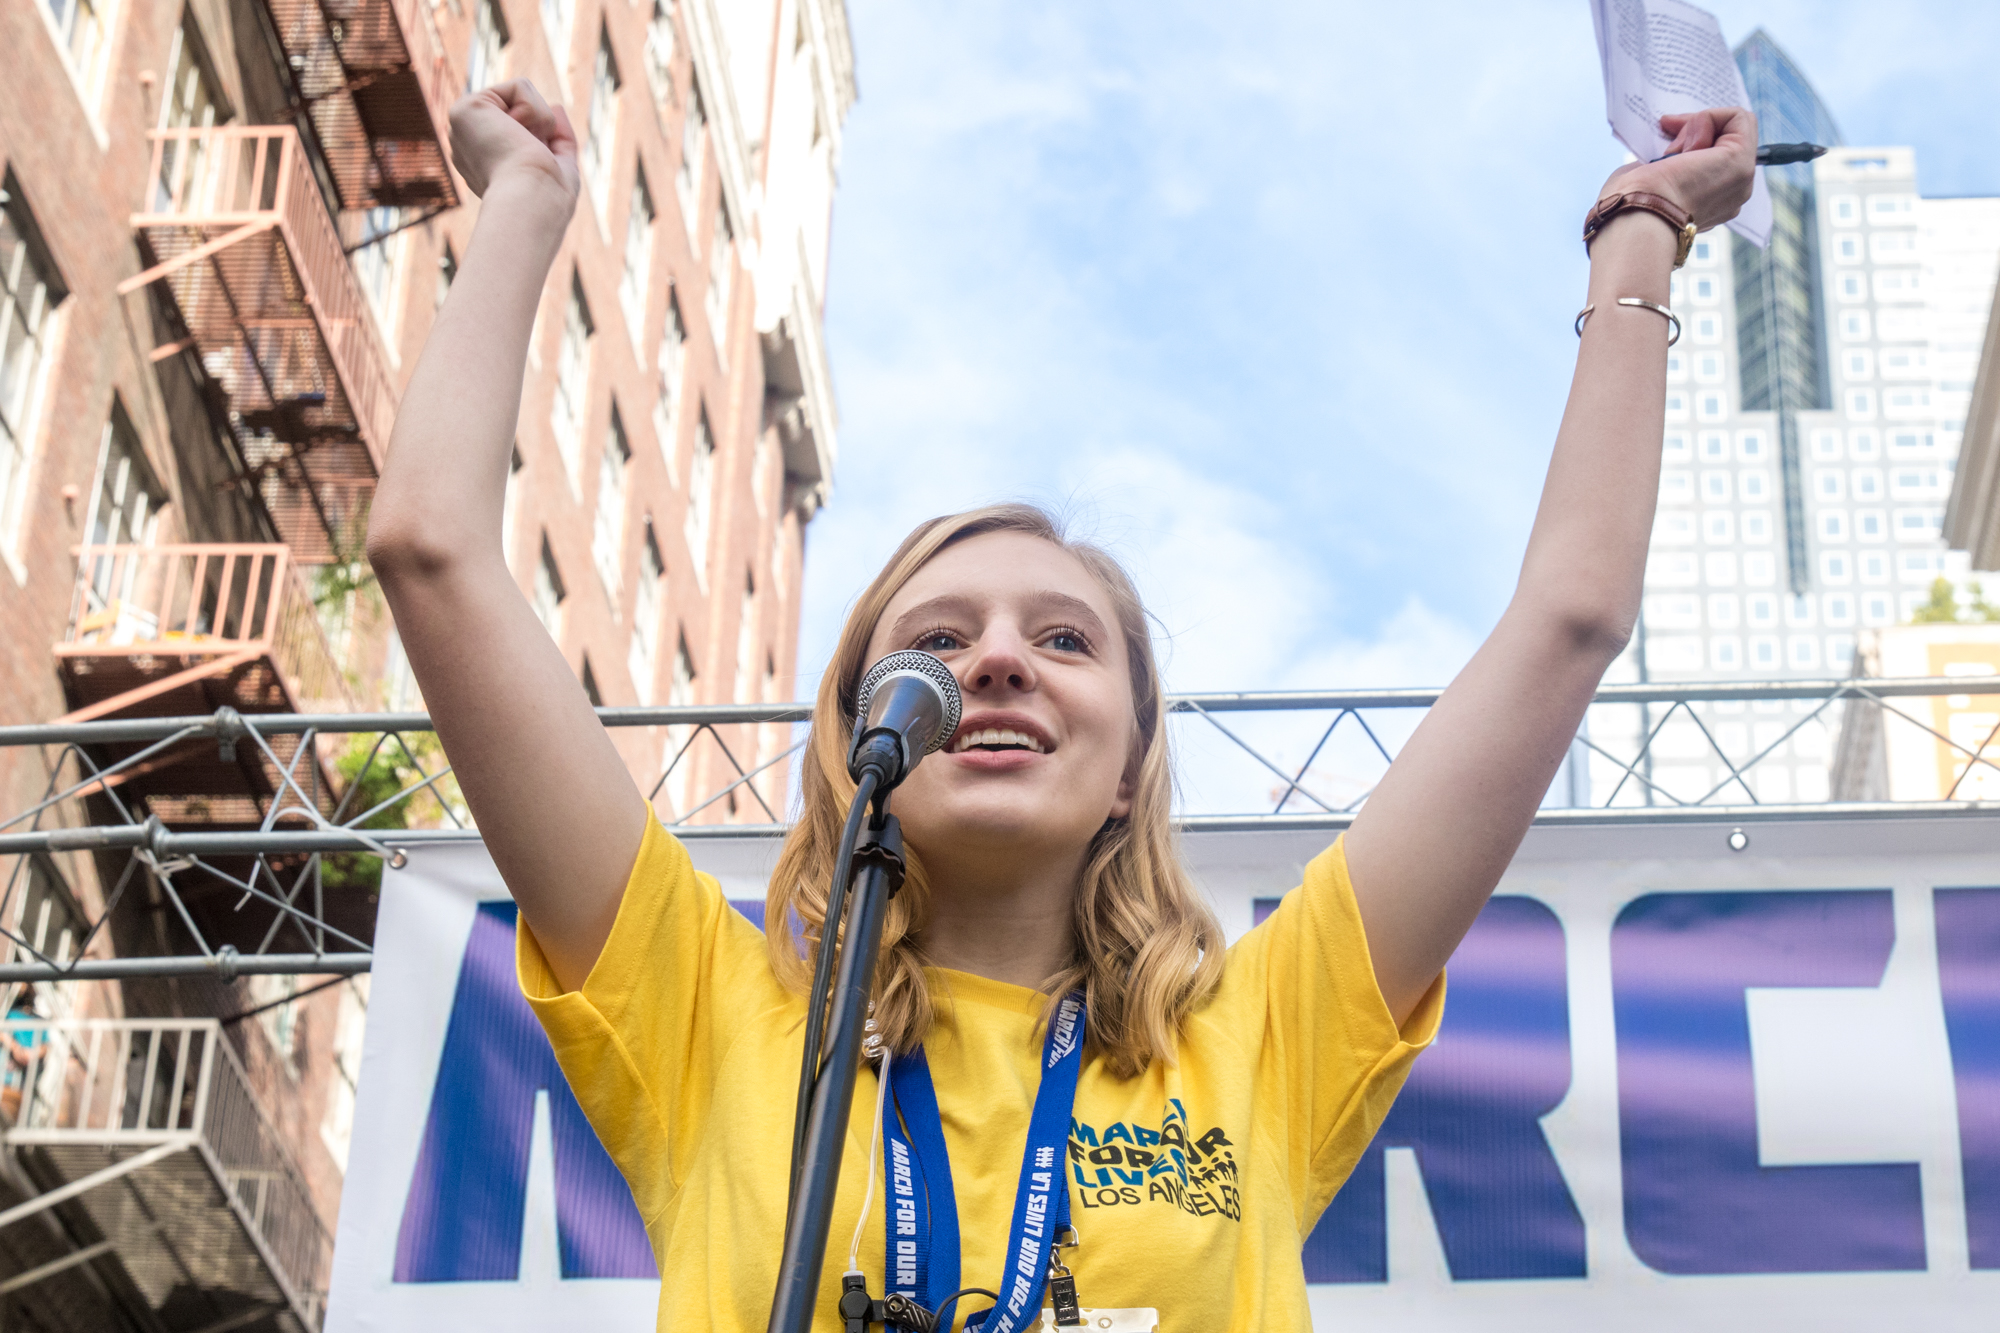  Santa Monica College student Jessica Flaum spoke in front of thousands of people at the March For Our Lives protest on March 24, 2018 in Los Angeles, California. Flaum was one of the many student activists speaking on gun control. (Zane Meyer-Thornt